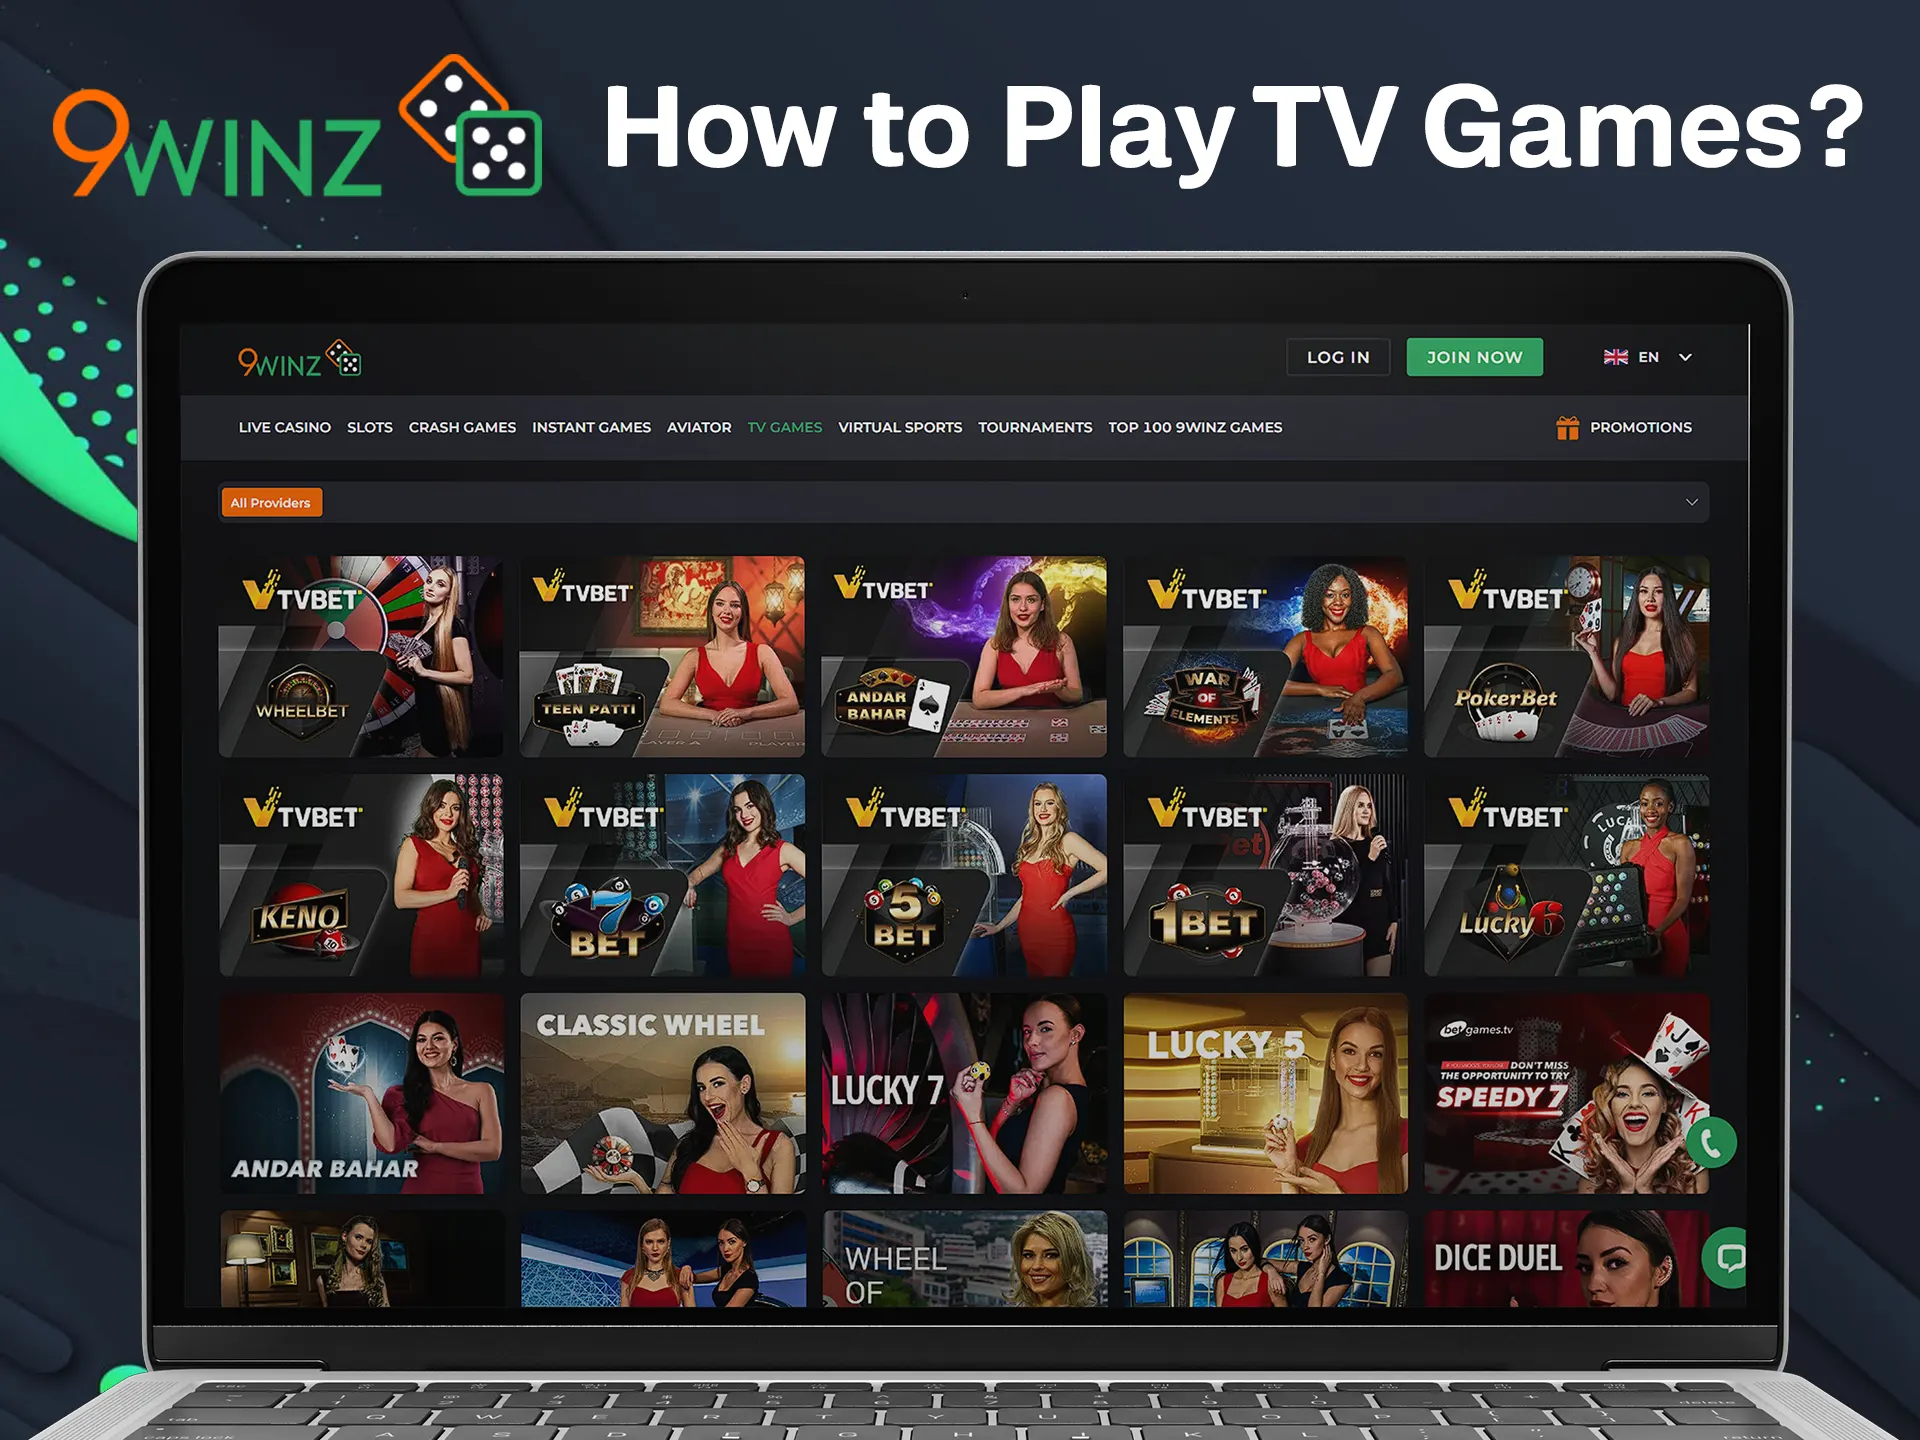 It's easy to start playing TV games at the 9winz casino.